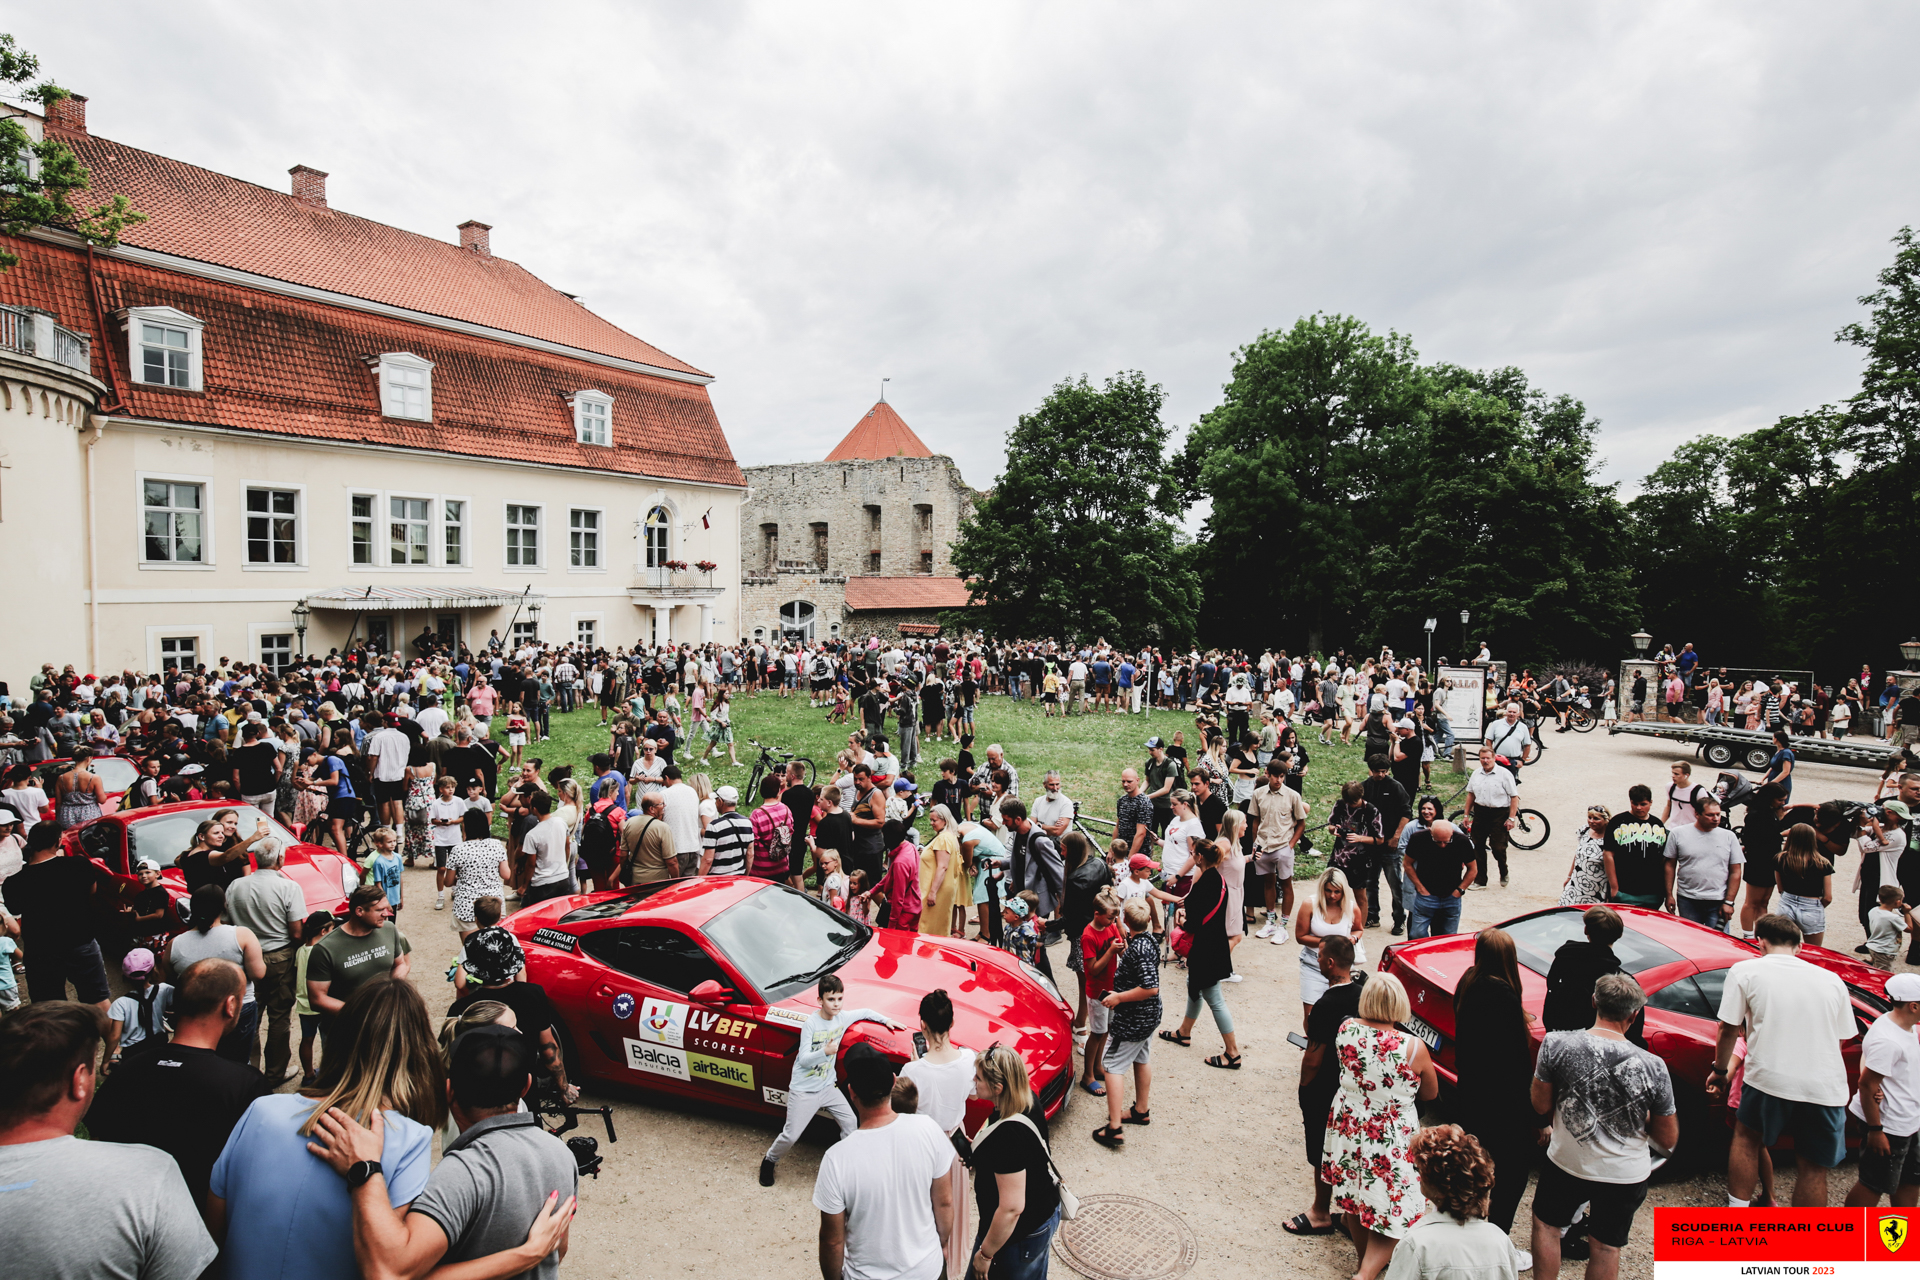 Cesis gathers in Pils Laukums to welcome the Ferrari tour with great affection. 